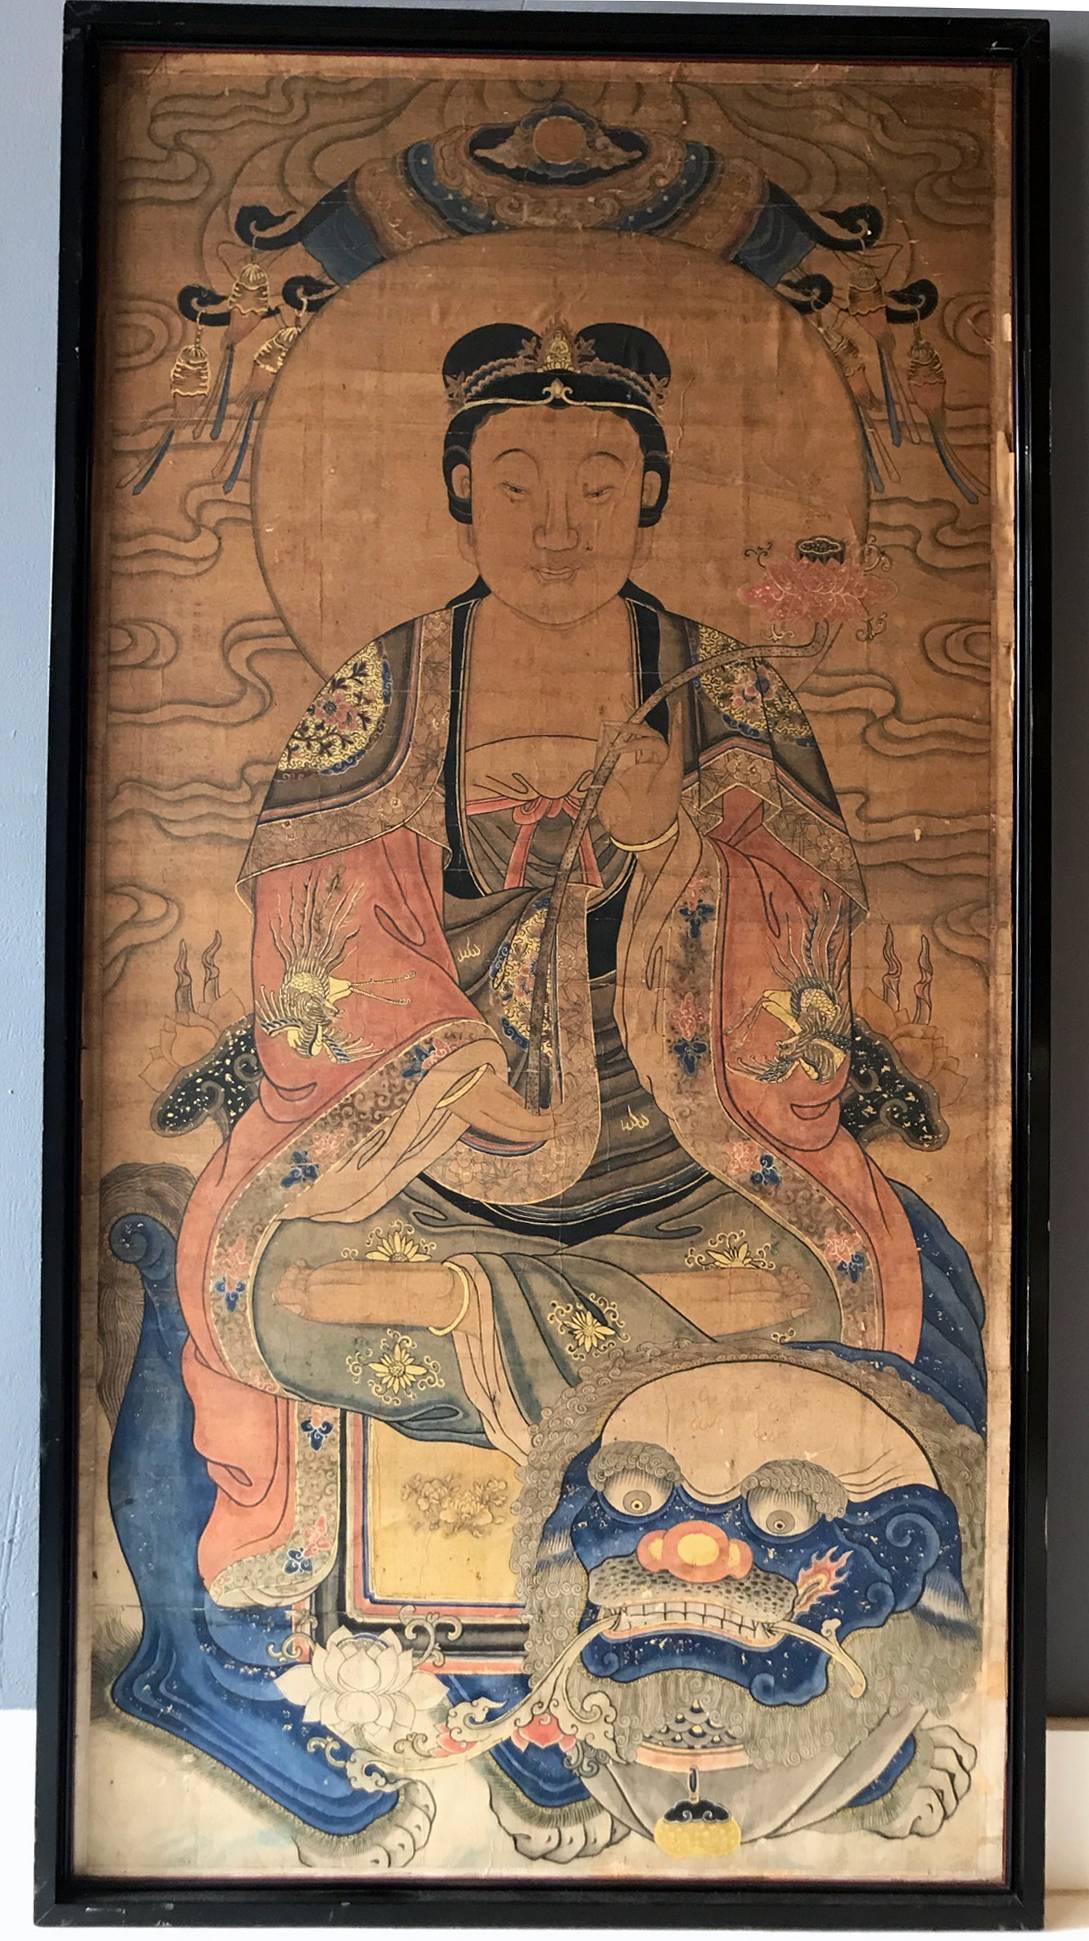 A rare pair of large Buddhism paintings that depicts Shakyamuni Buddha and Manjushri Bodhisattva. These antique paintings were made with ink, color and gilt on paper and executed in a Ming dynasty style and iconography. They are likely dated to the